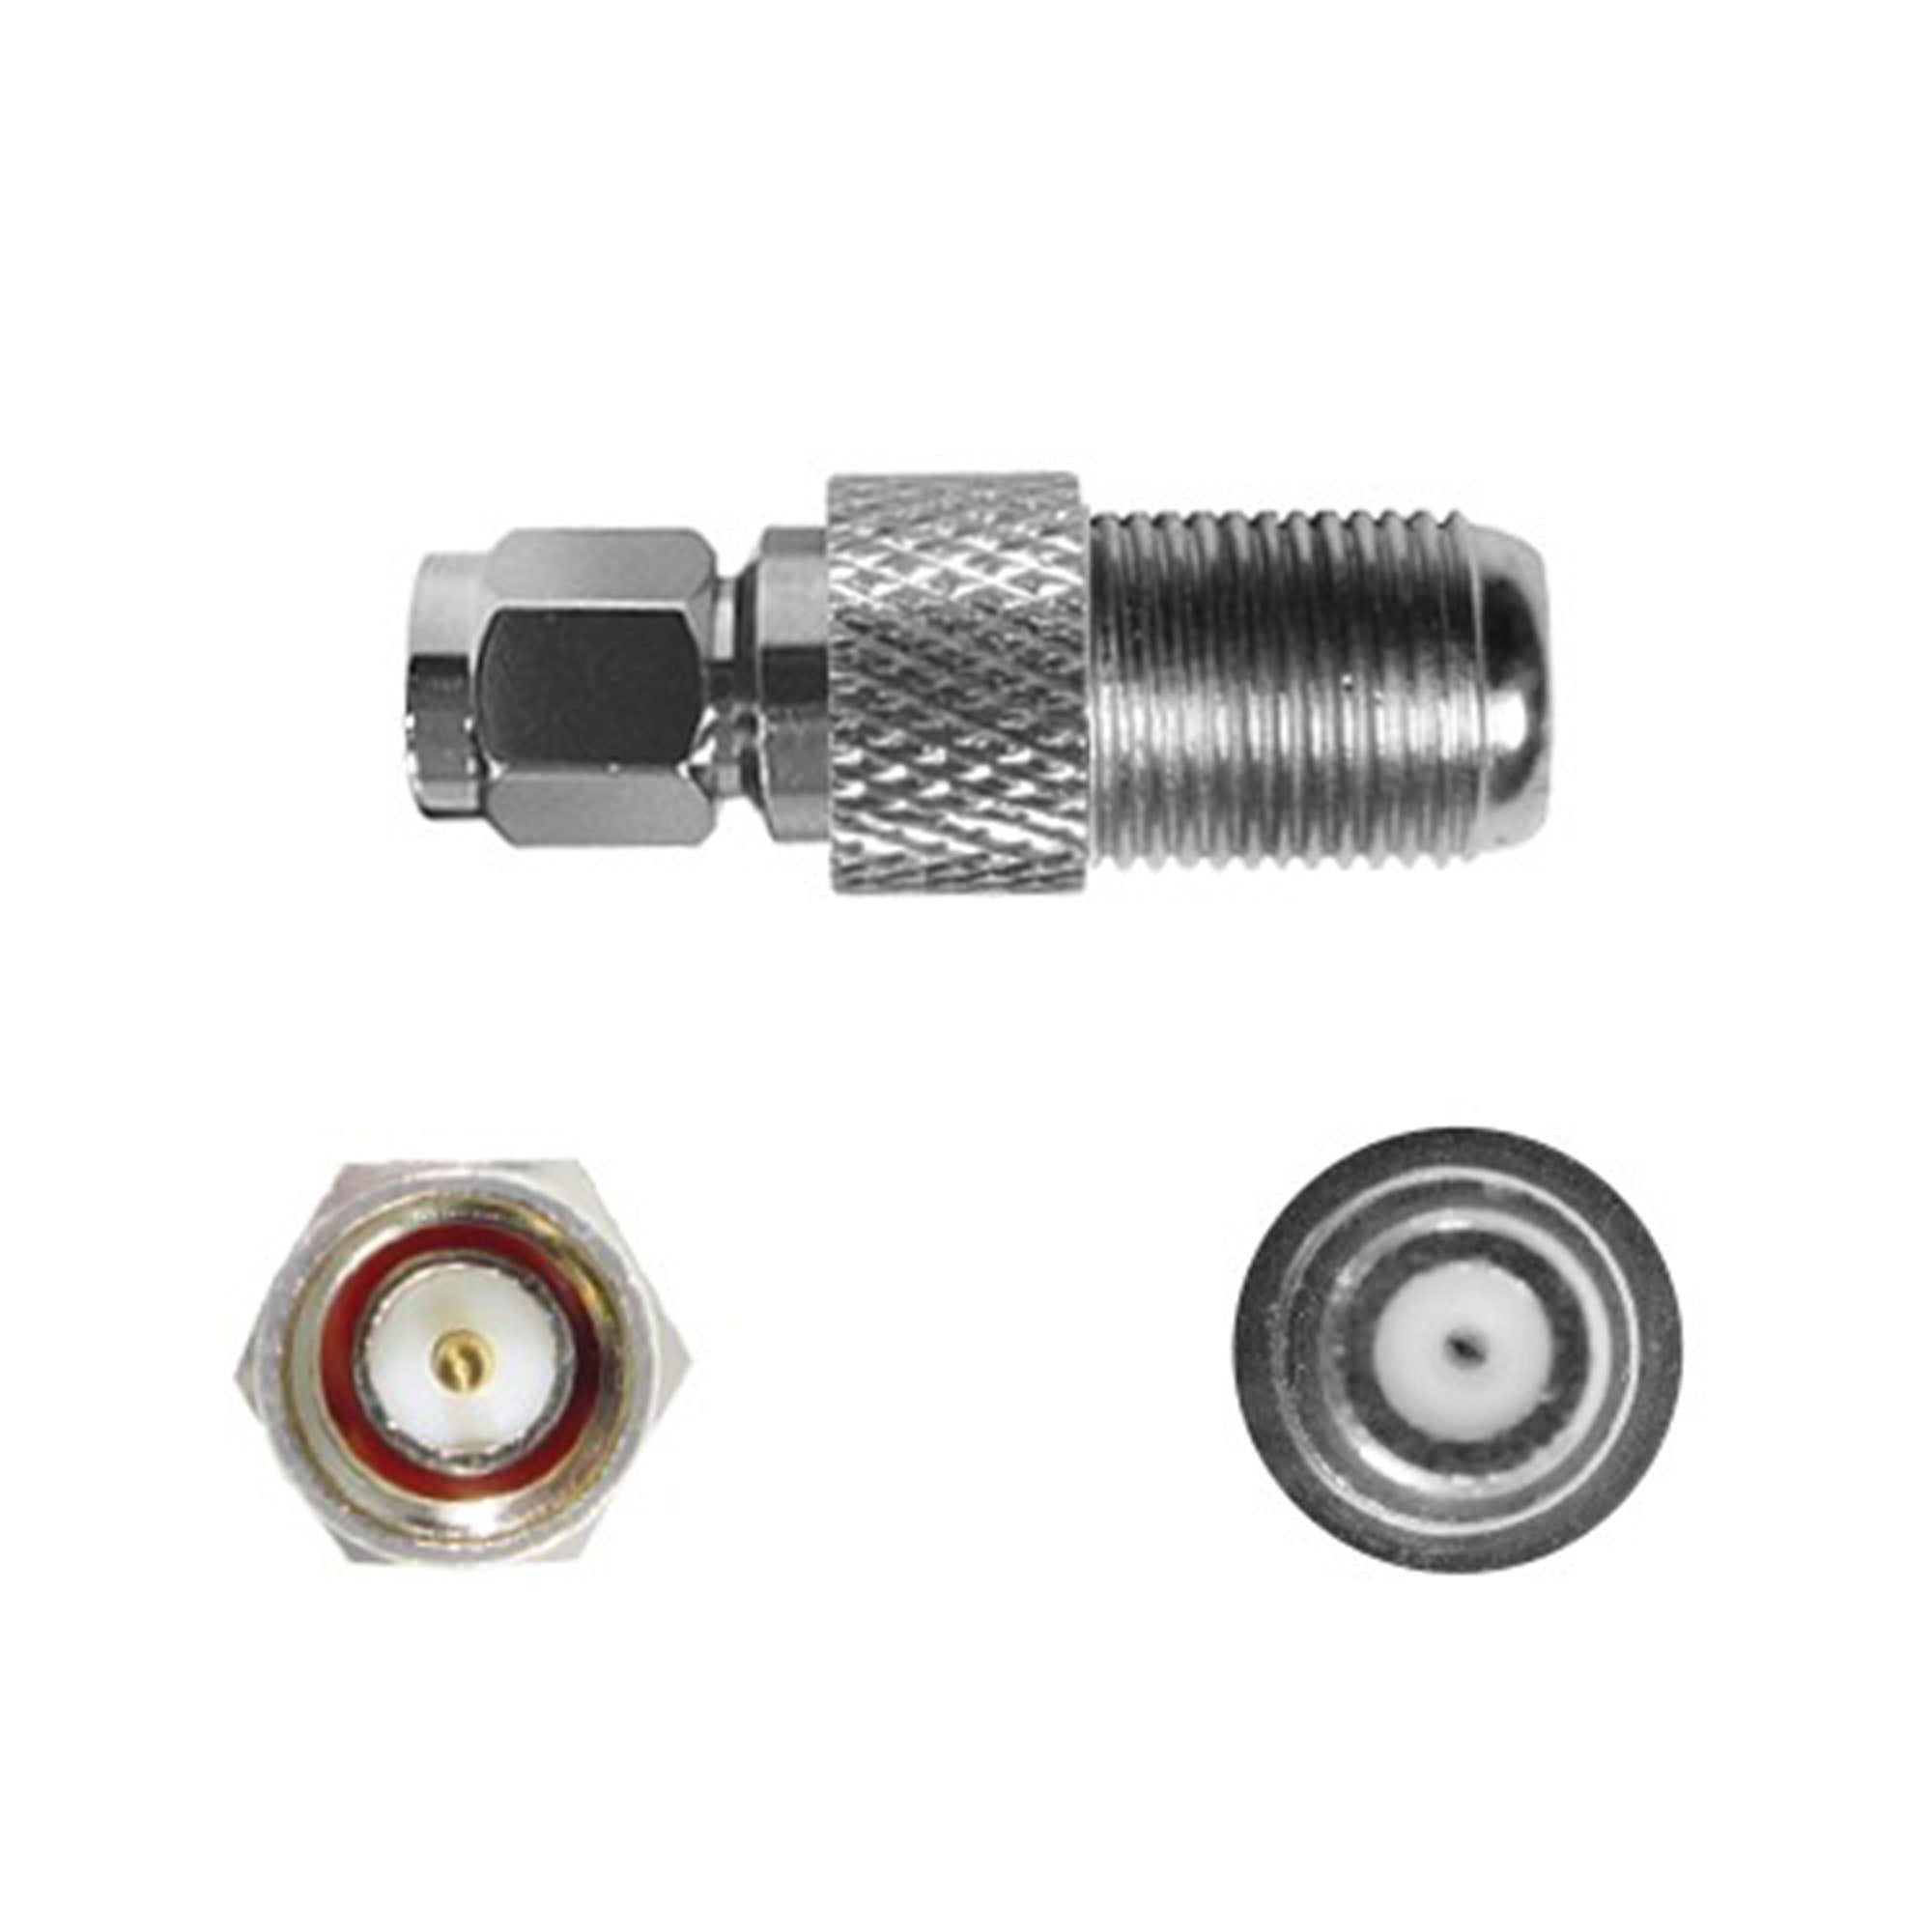 WeBoost SMA Male to F Female Connector - 15-00823